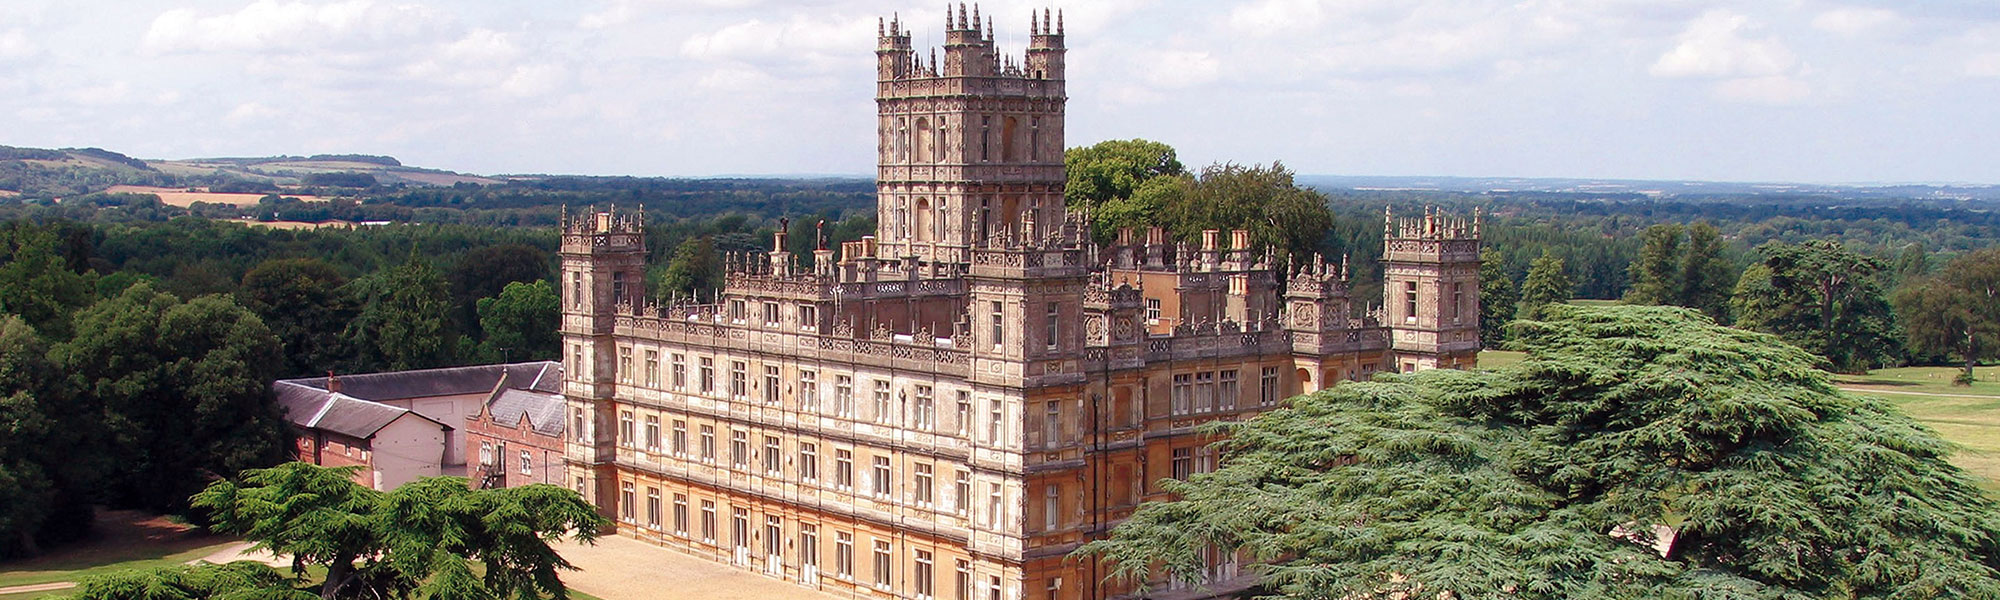 tourhub | Just Go Holidays | Downton Abbey - Behind the Scenes Exclusive 